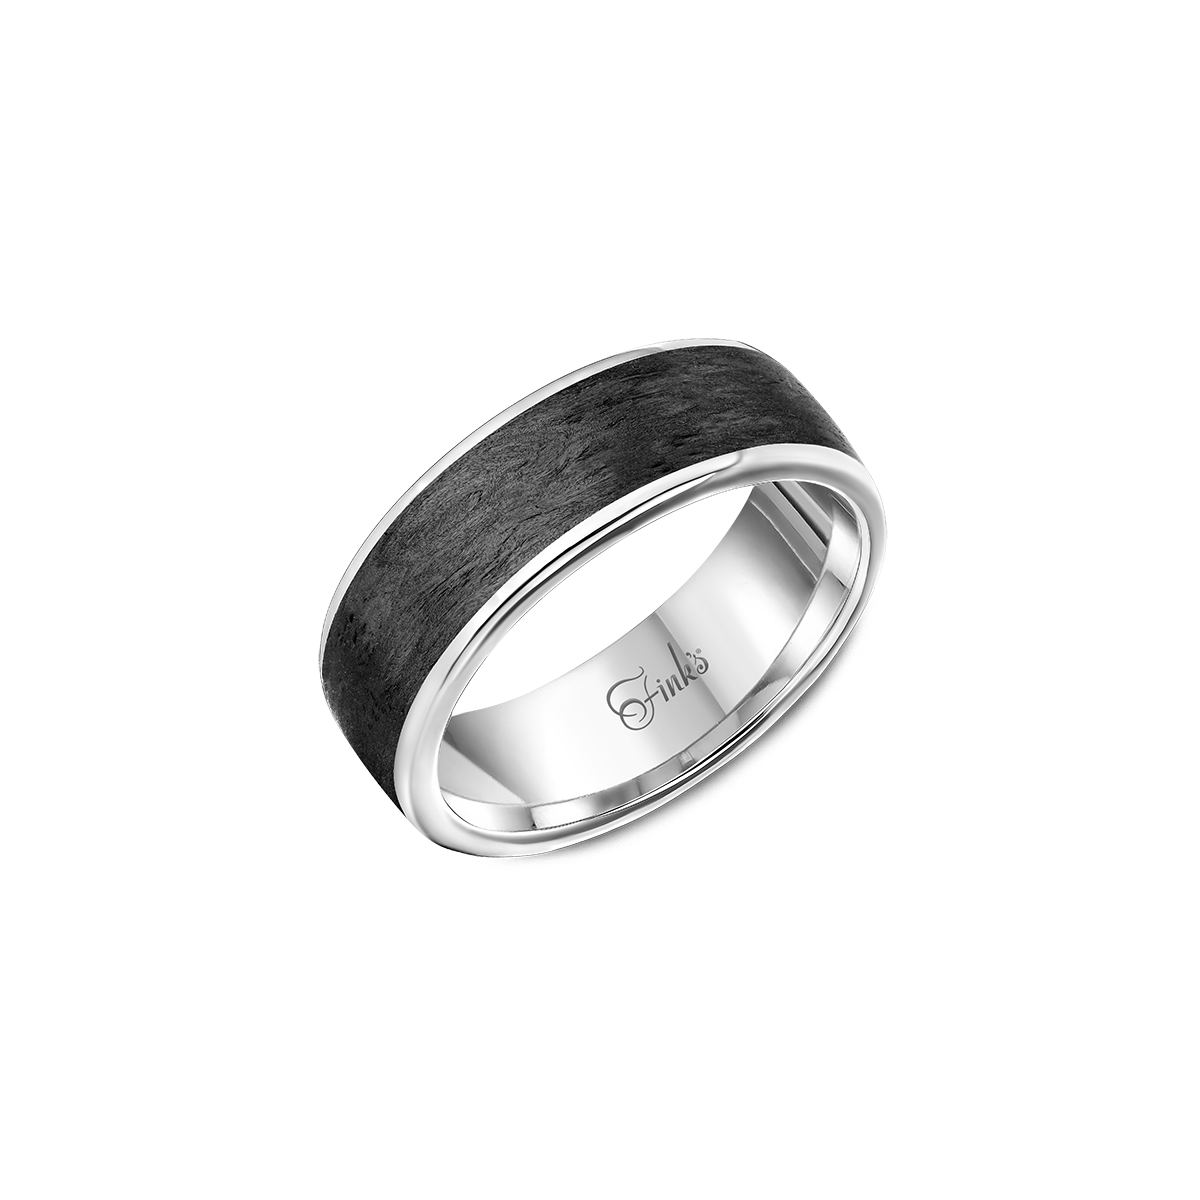 Fink's White Gold and Forged Carbon Fiber Thick Wedding Band